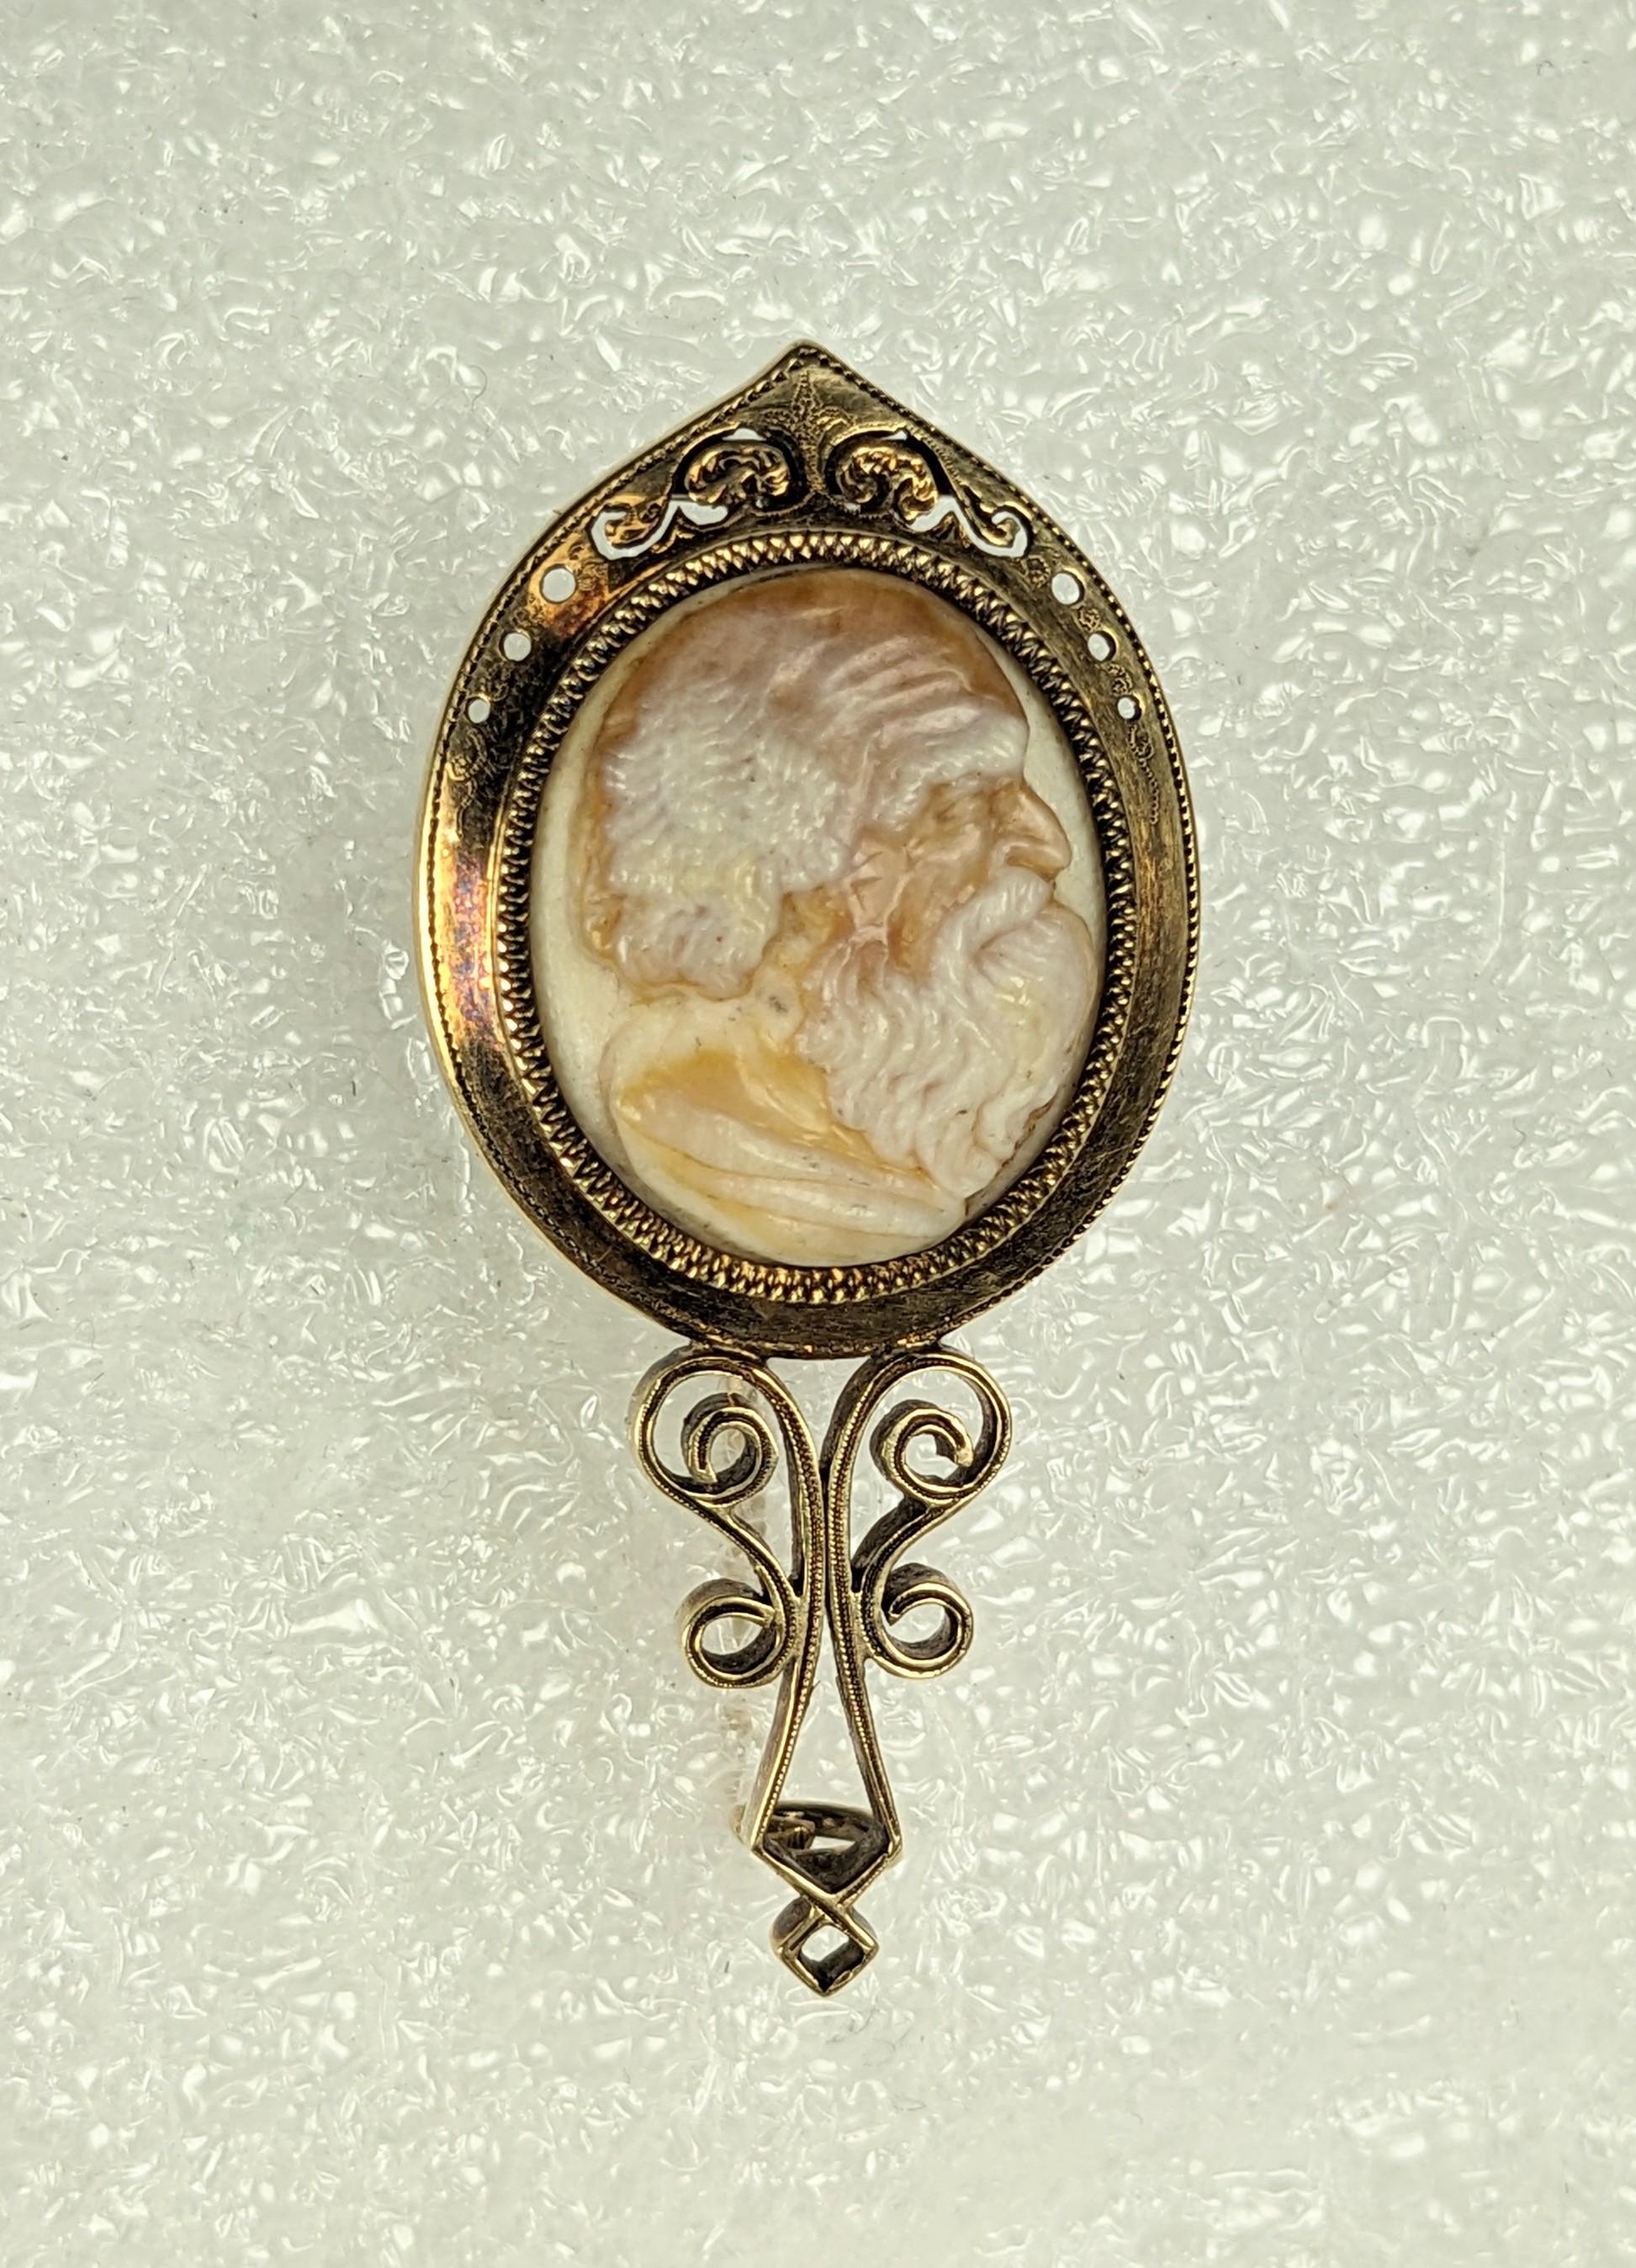 Lovely Victorian Stone Cameo Scholar Brooch set in a 14k hand mirror form with etched with pierced decor. Beautifully carved profile of an old man in agate so hair remains white and skin is the darker layer underneath. 1860's Europe. 1.75